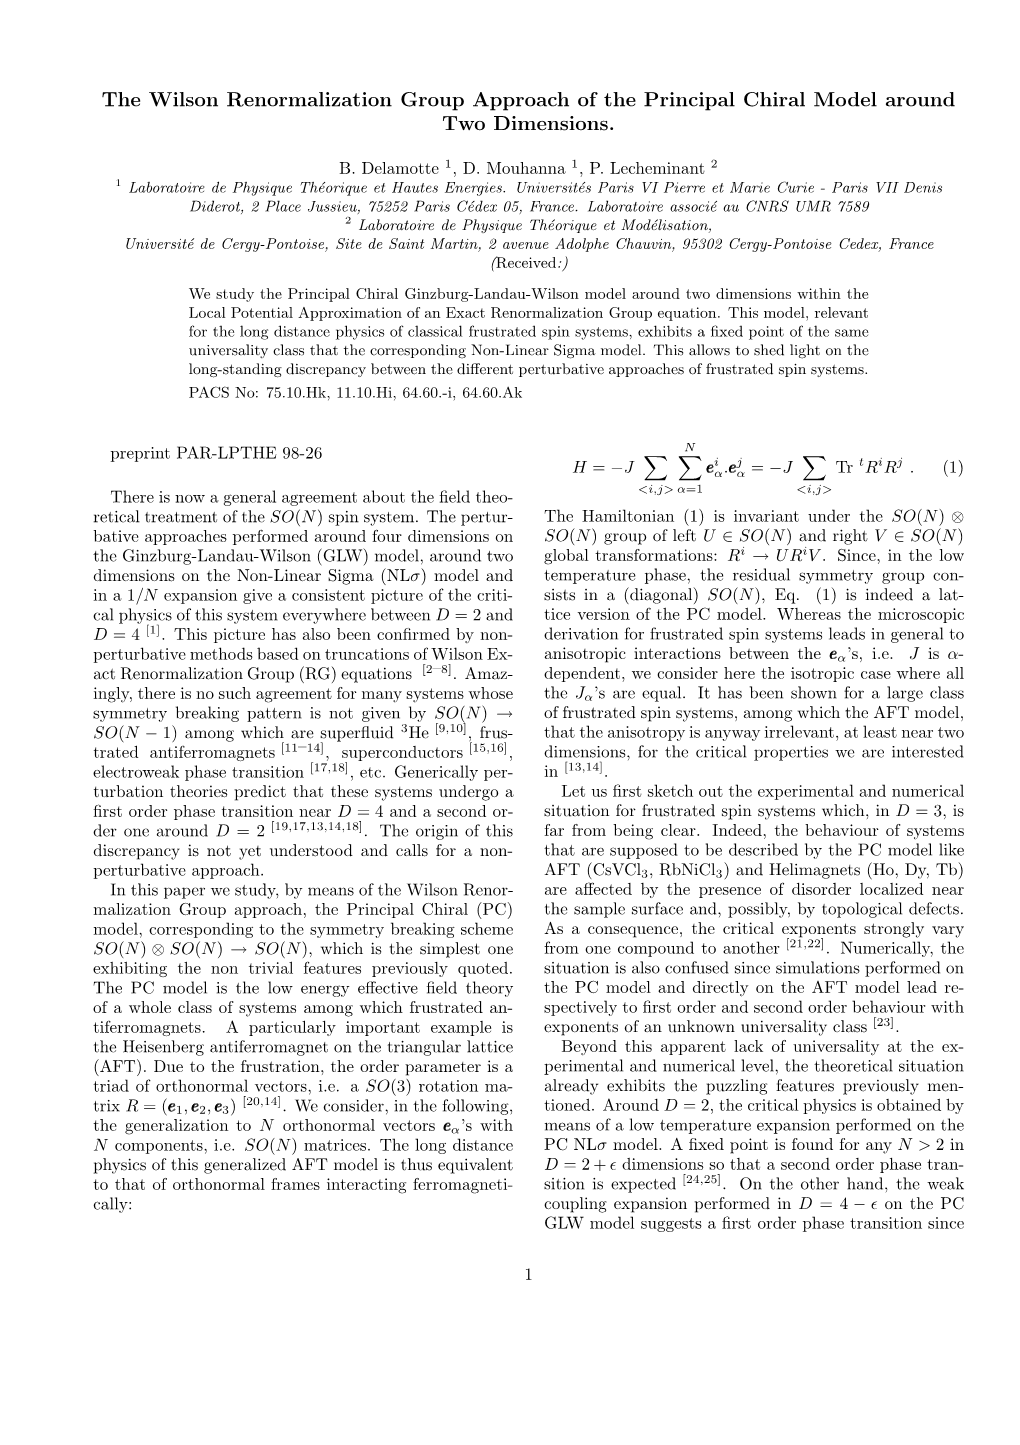 The Wilson Renormalization Group Approach of the Principal Chiral Model Around Two Dimensions